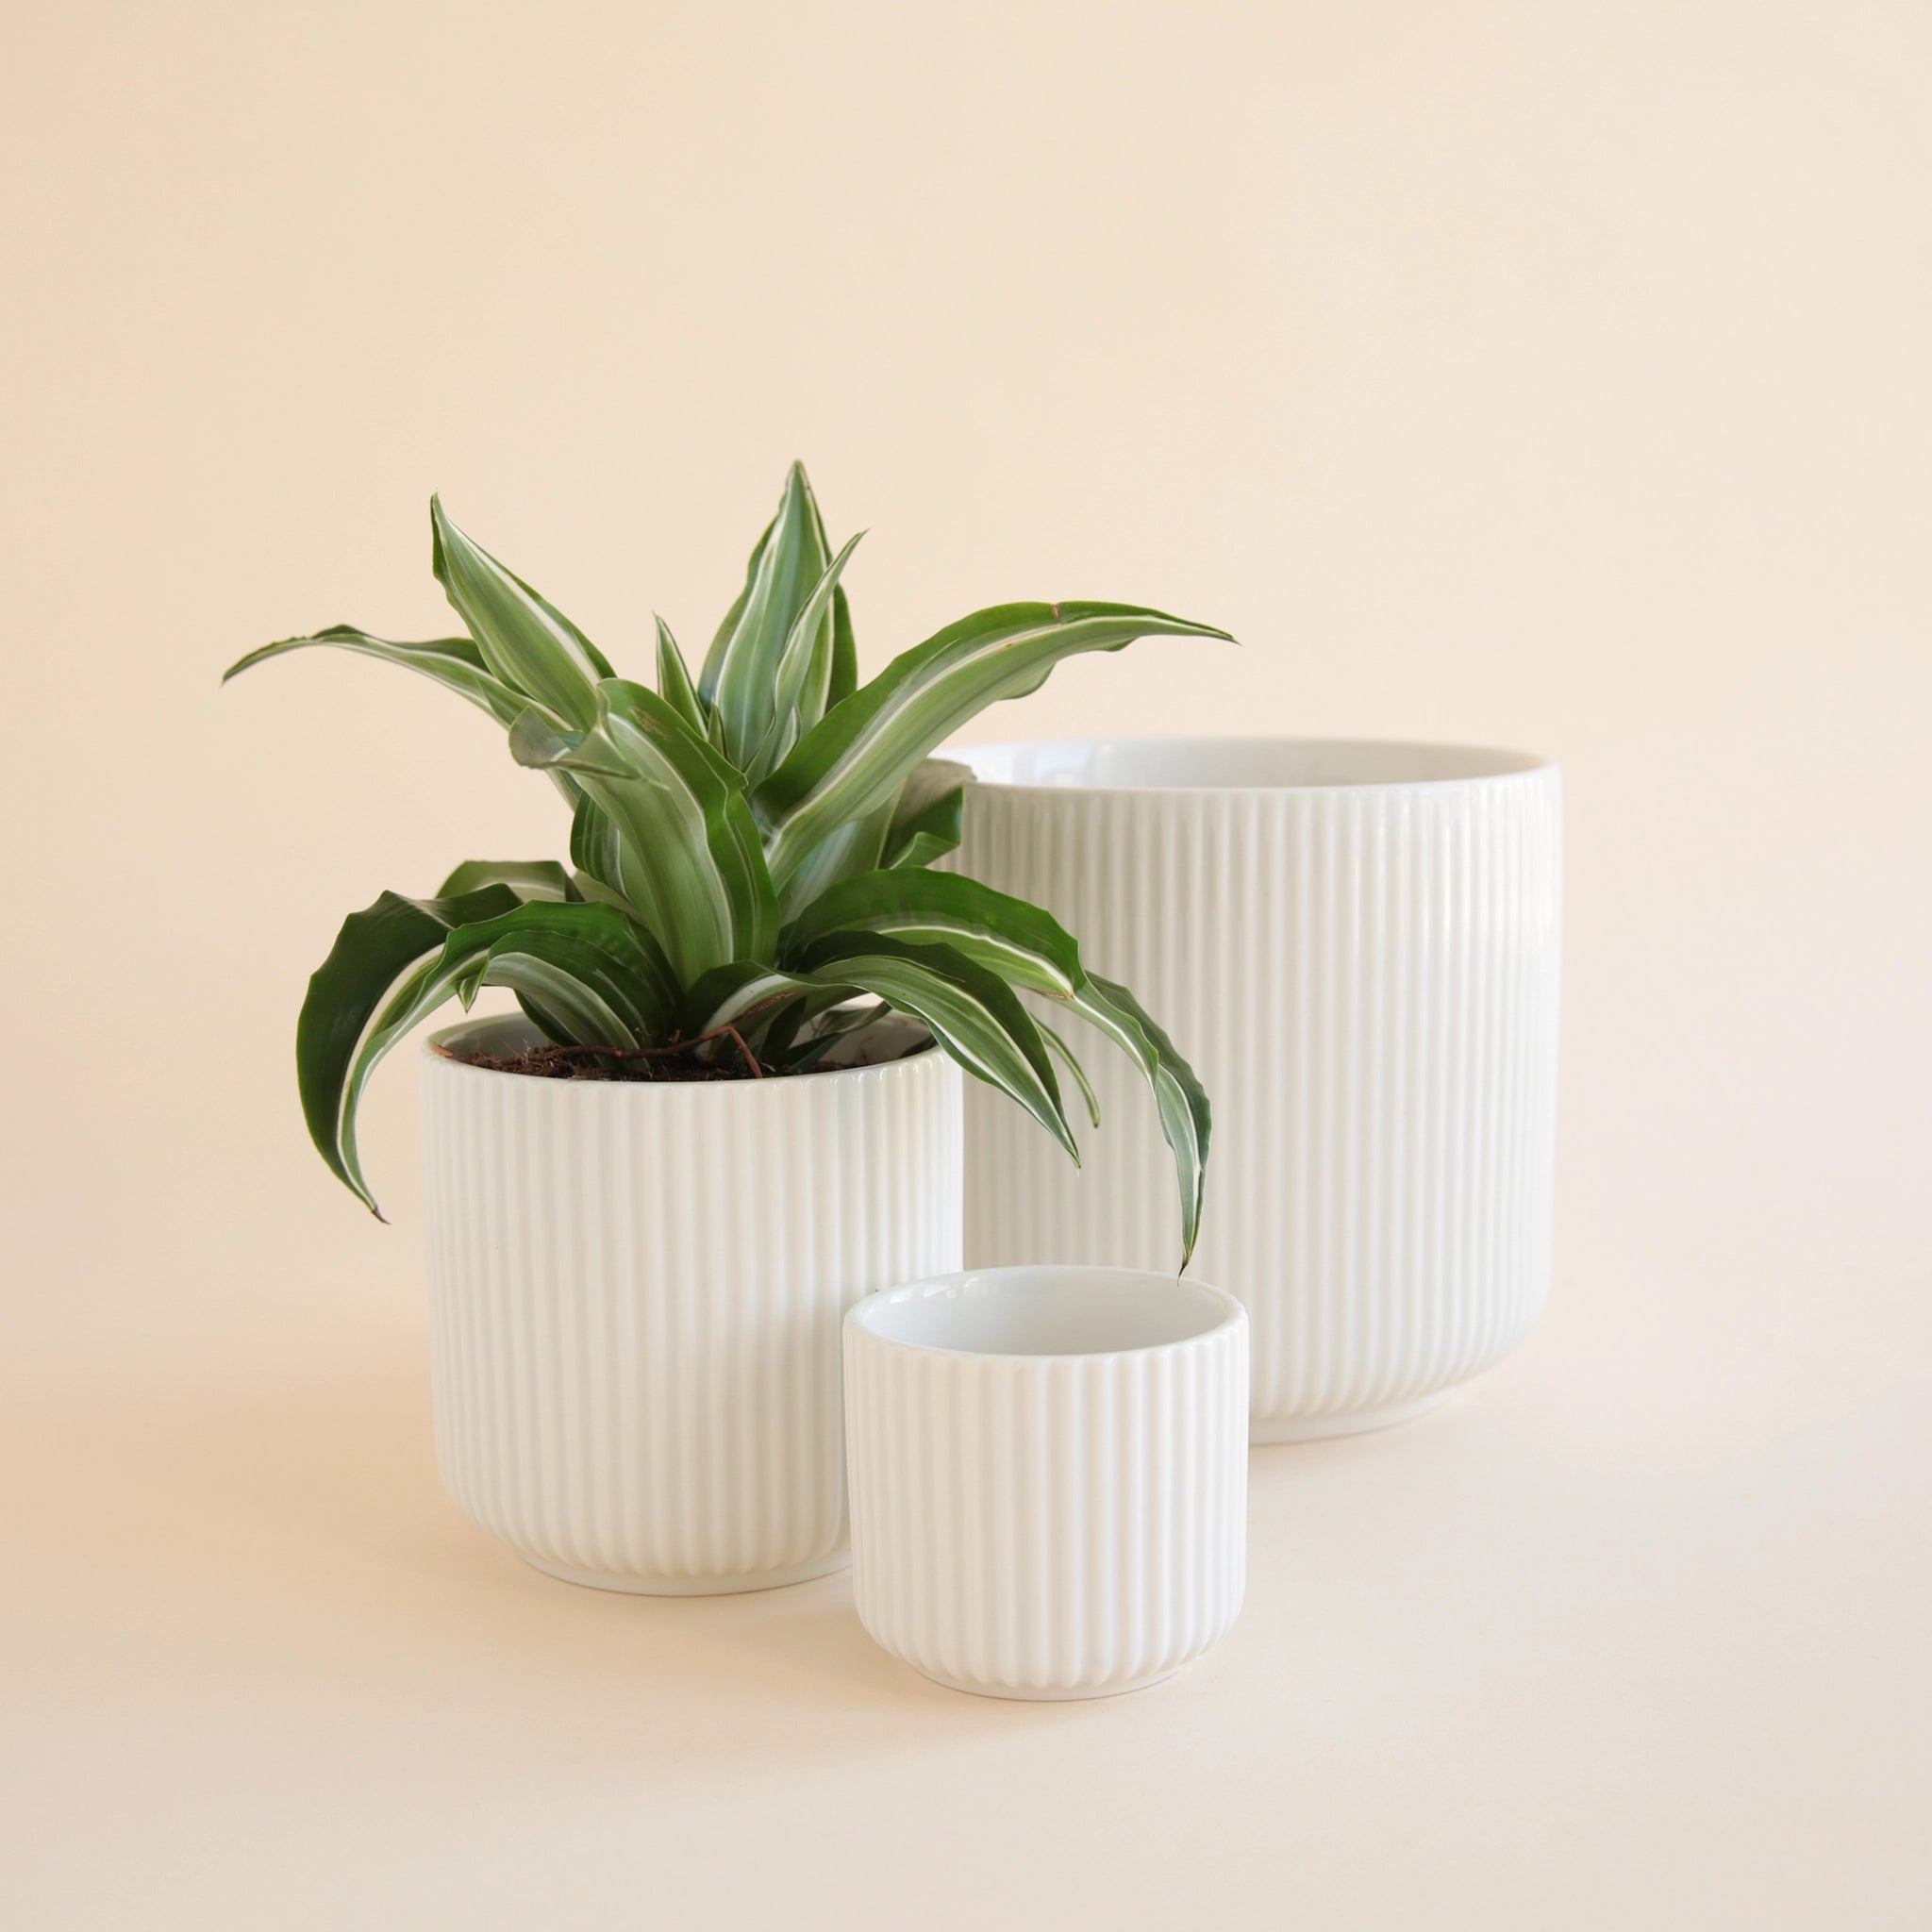 On an ivory background is three different sized white ceramic planters with a fluting detailing and a rounded bottom.